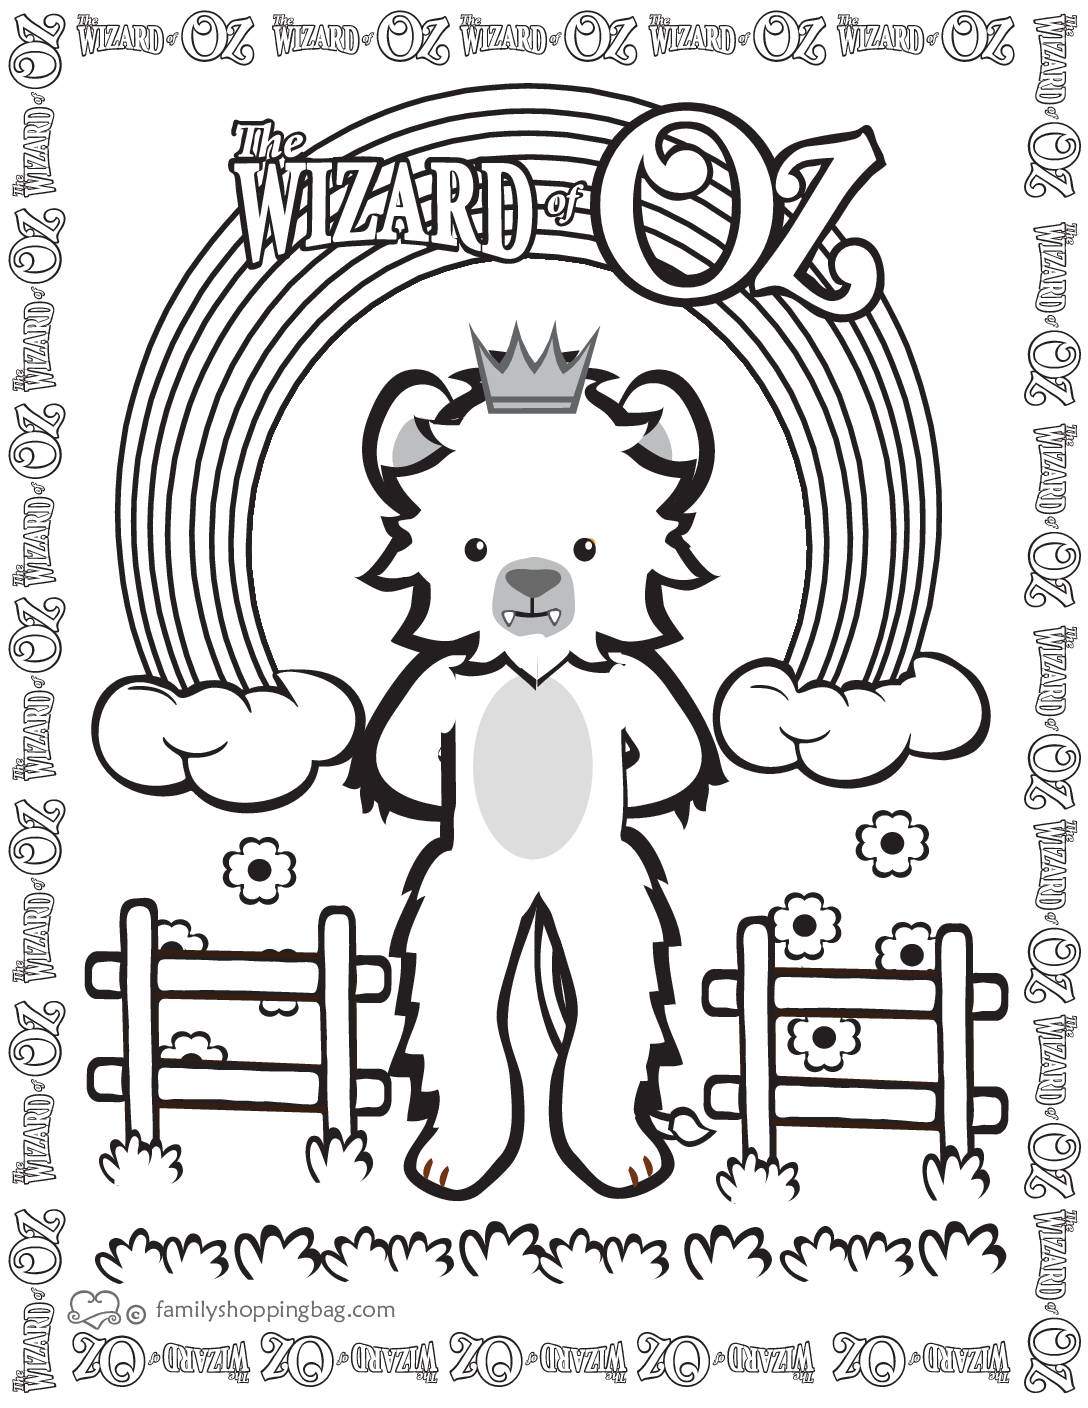 Coloring Page 7 Wizard of Oz Coloring Pages